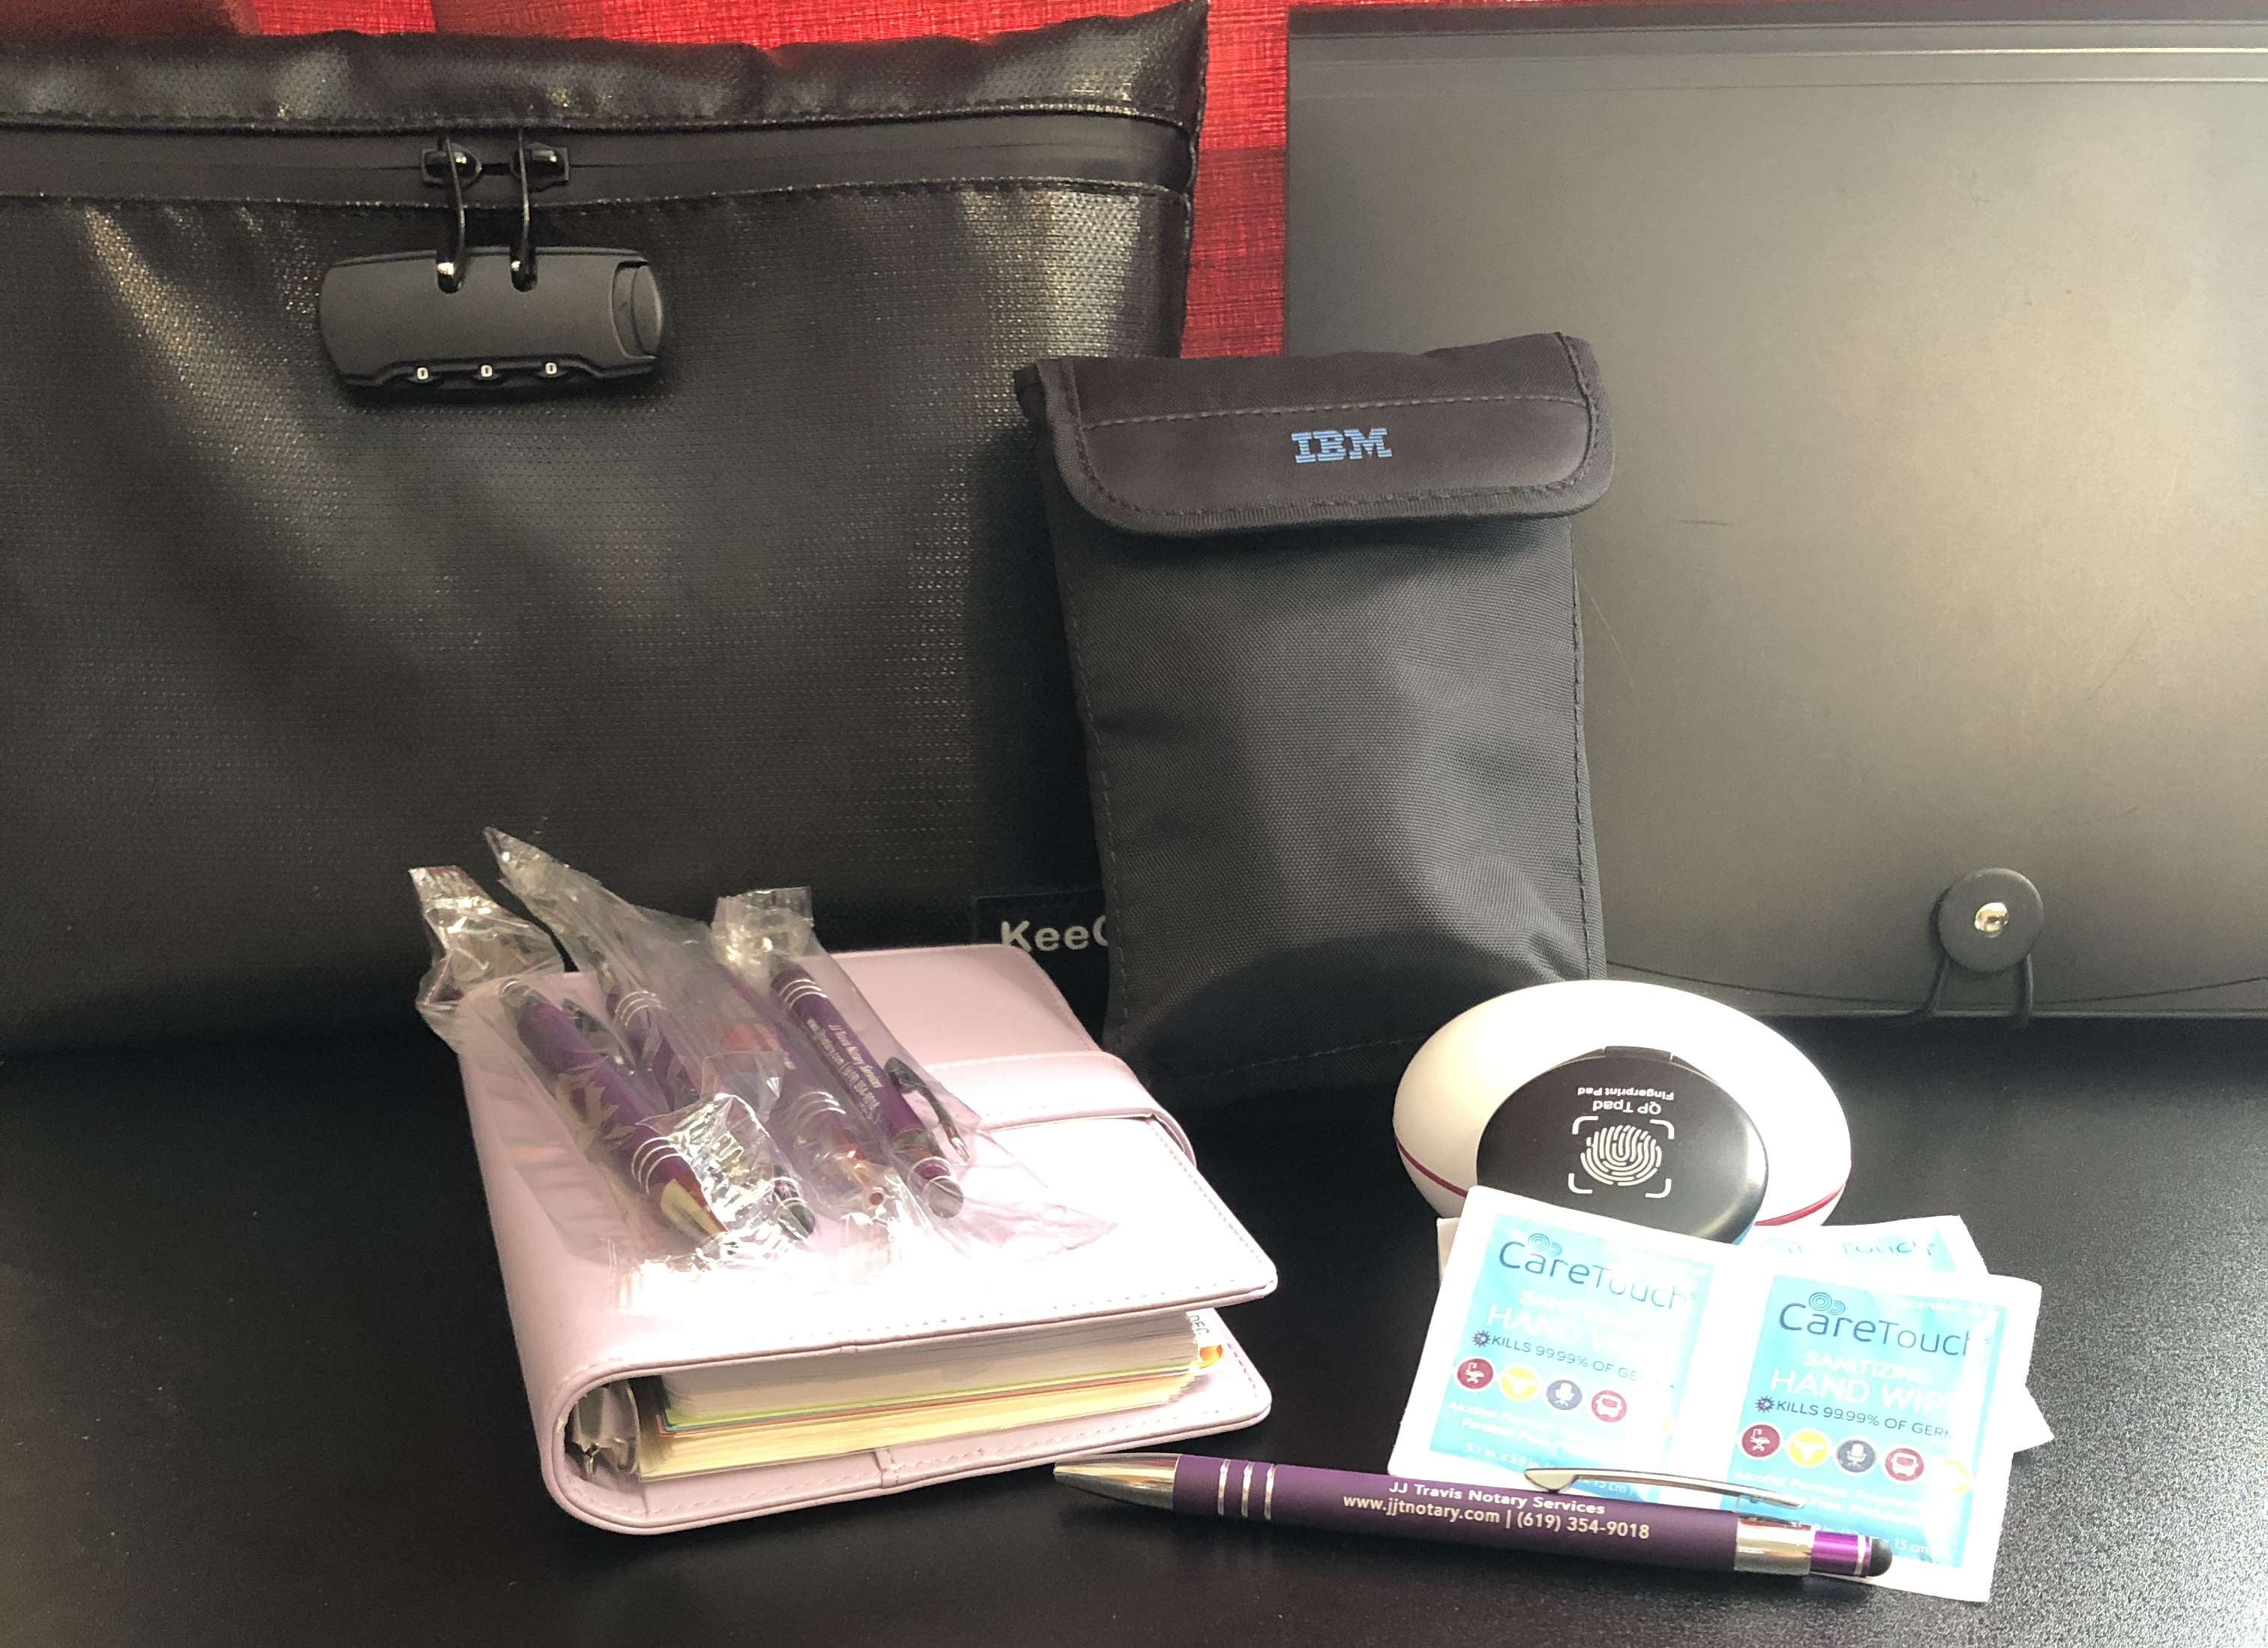 Notary Bag Contents